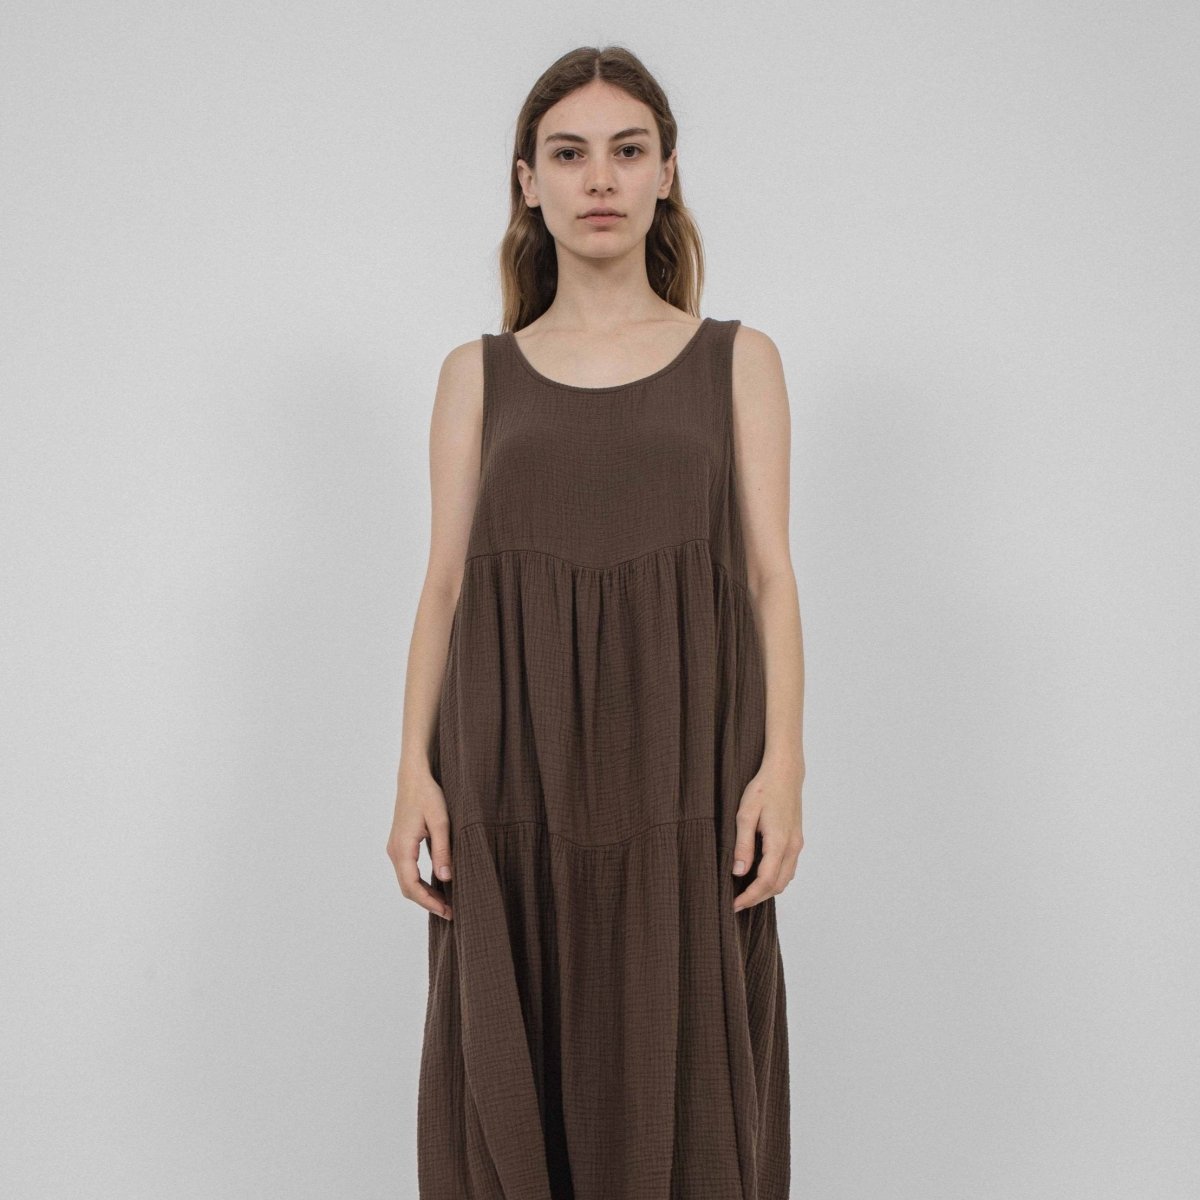 A model wears a sleeveless loose fitting dress with two tiers of fabric that form the bottom portion of the dress. The Harlow Dress on Cocoa is designed and made by Corinne Collection in Los Angeles, CA.